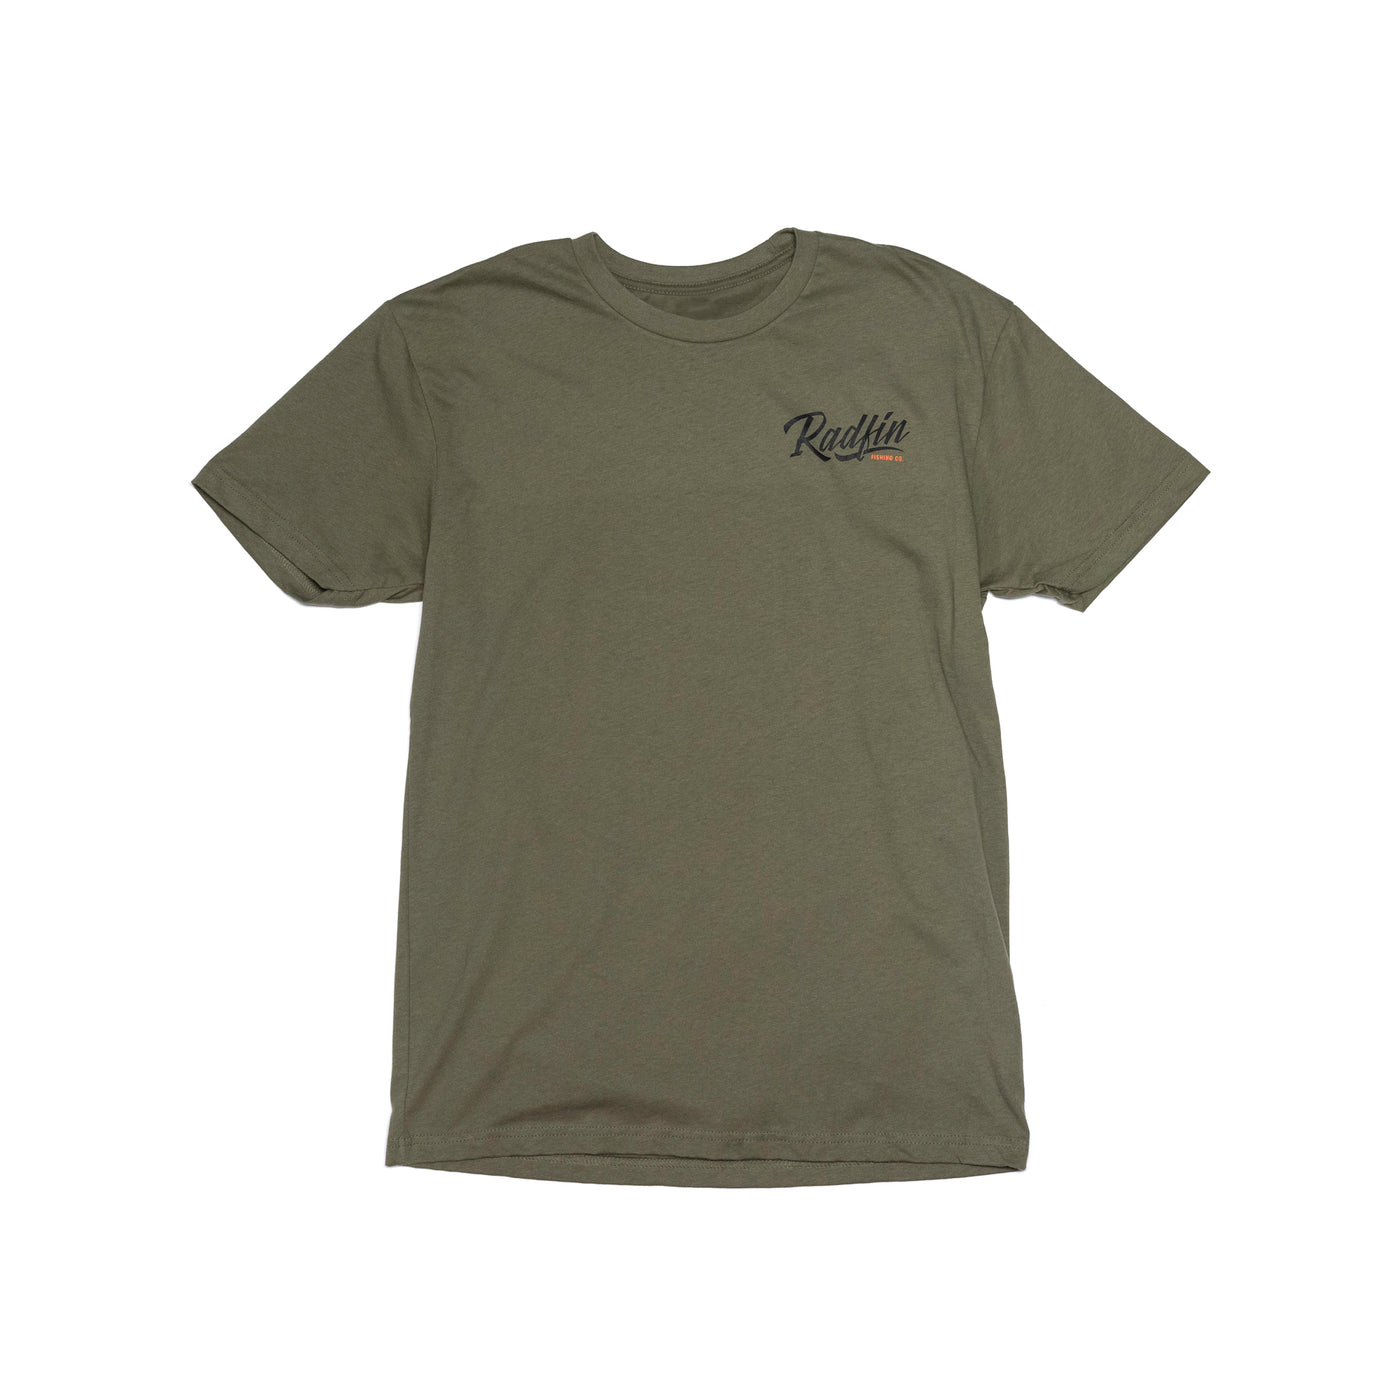 Redfin Print Olive T-Shirt